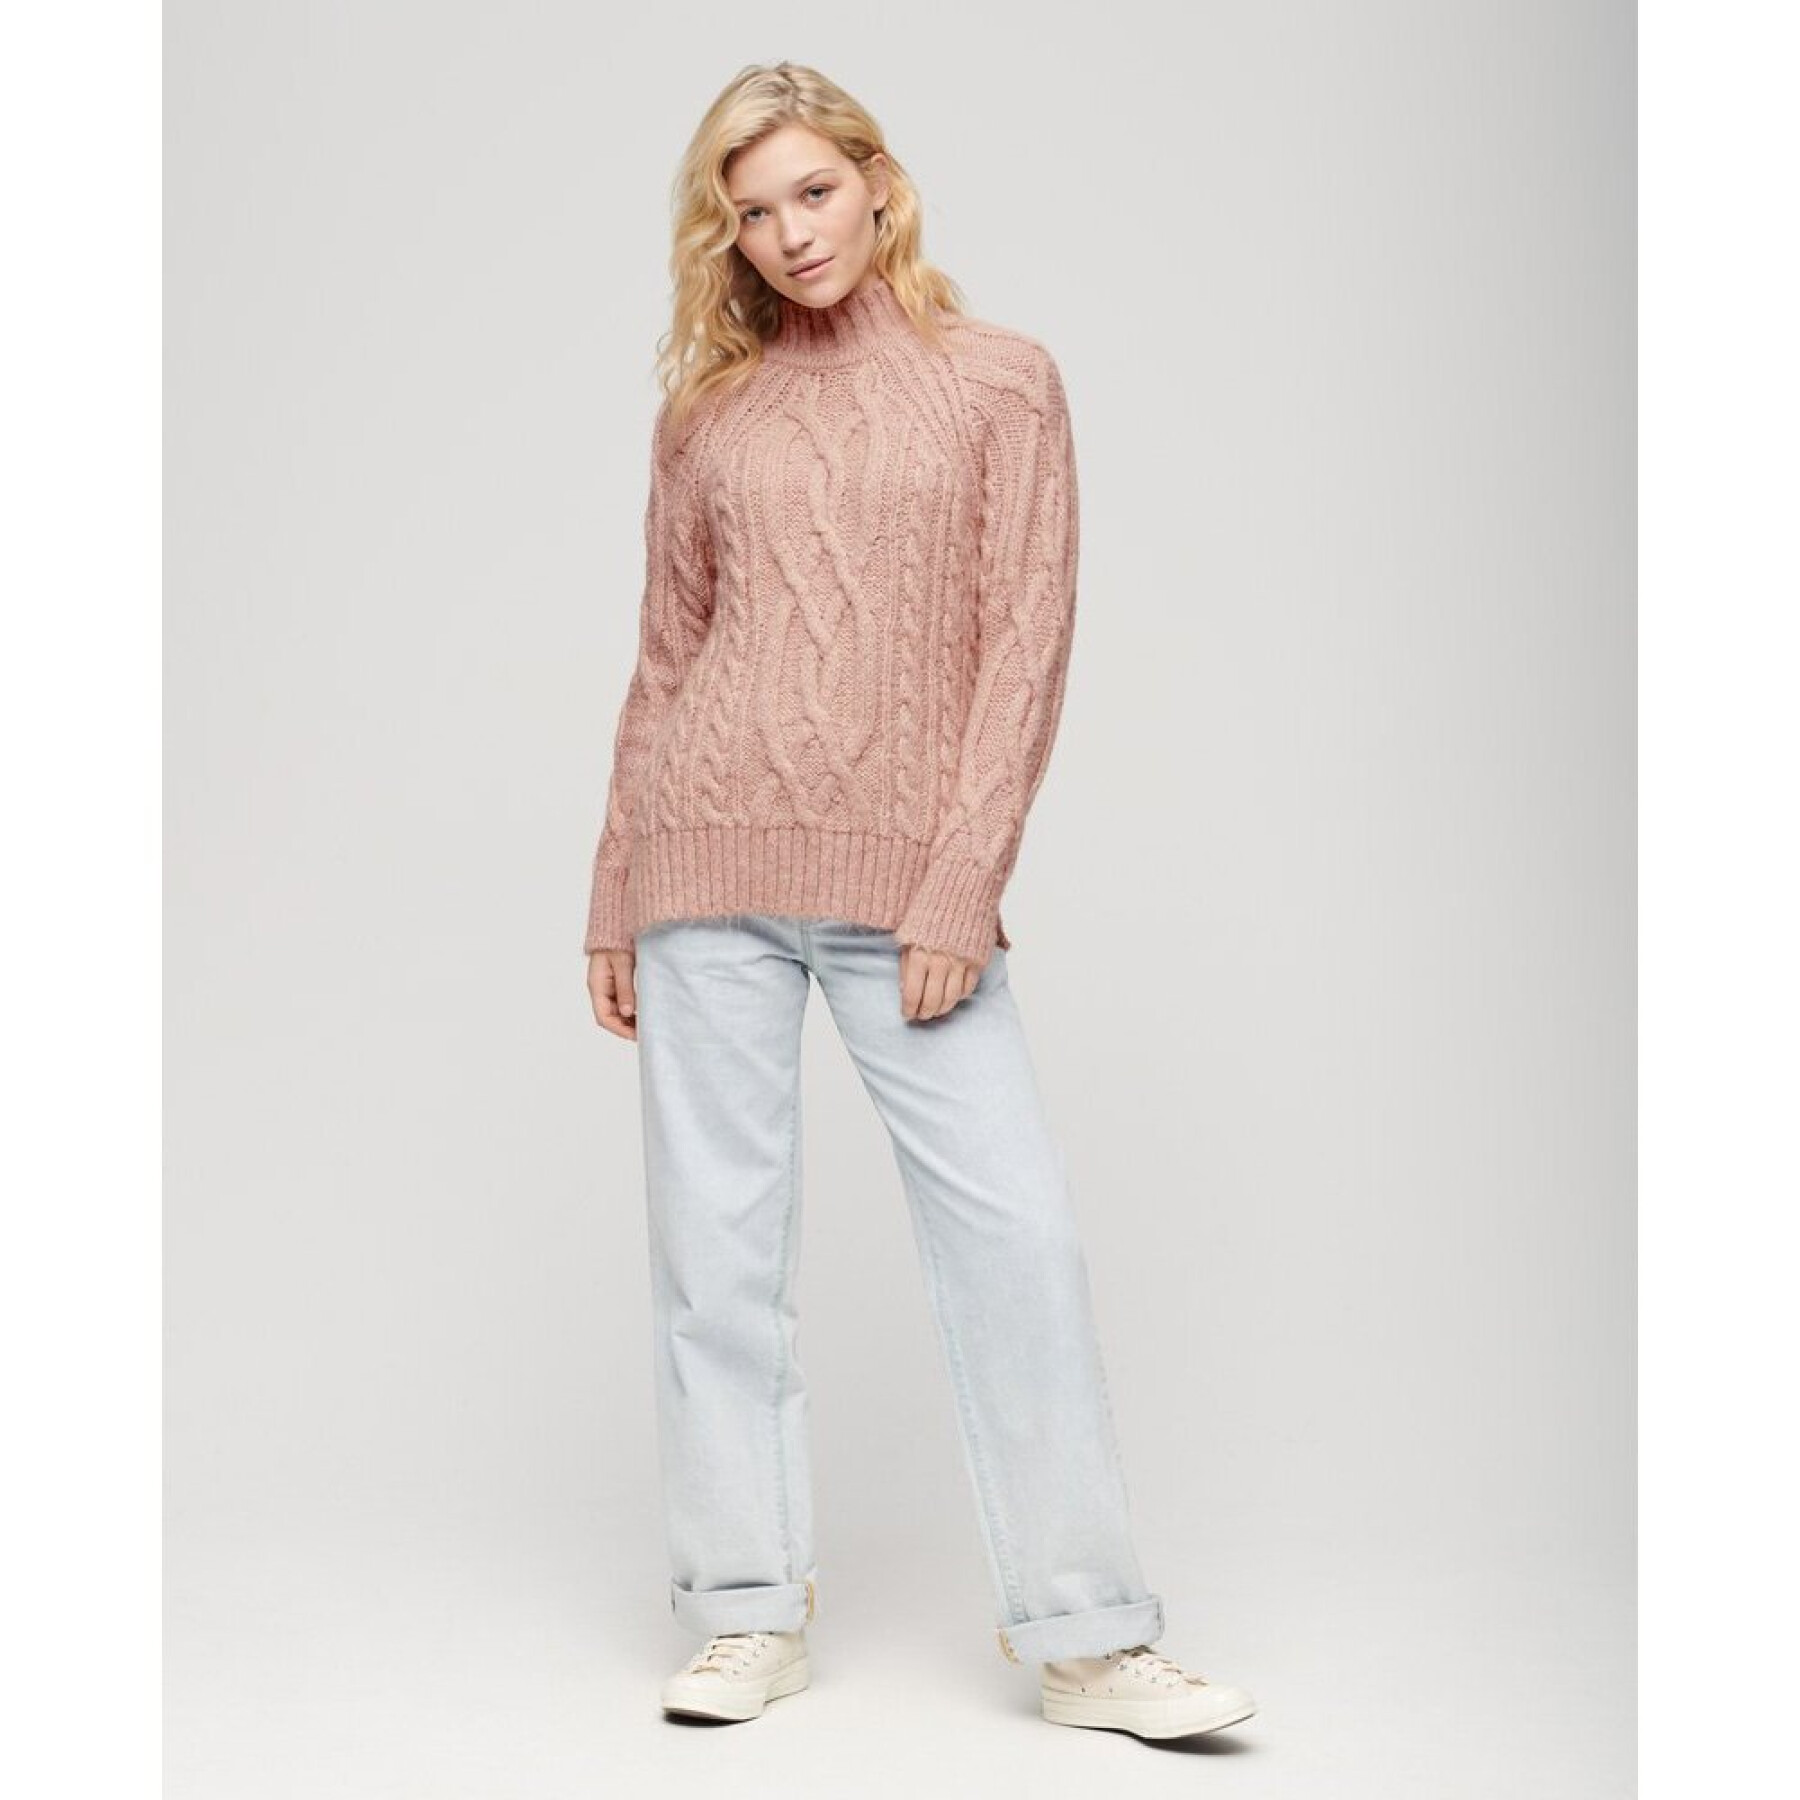 Women's high-neck cable-knit sweater Superdry